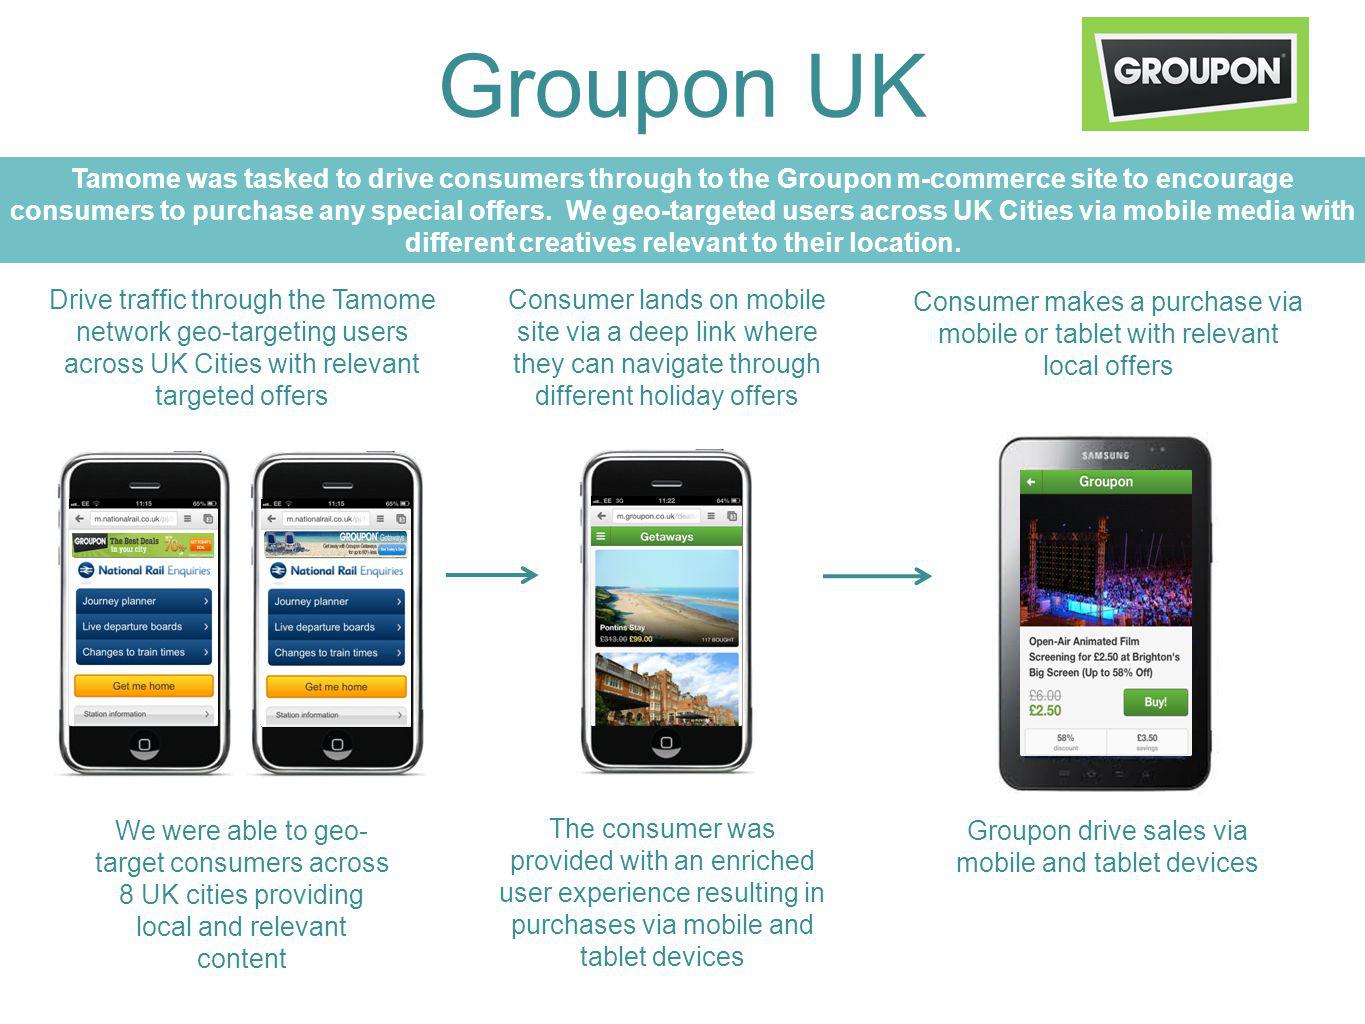 CONFIDENTIAL Groupon UK Drive traffic through the Tamome network geo-targeting users across UK Cities with relevant targeted offers Consumer lands on mobile site via a deep link where they can navigate through different holiday offers Consumer makes a purchase via mobile or tablet with relevant local offers Tamome was tasked to drive consumers through to the Groupon m-commerce site to encourage consumers to purchase any special offers.